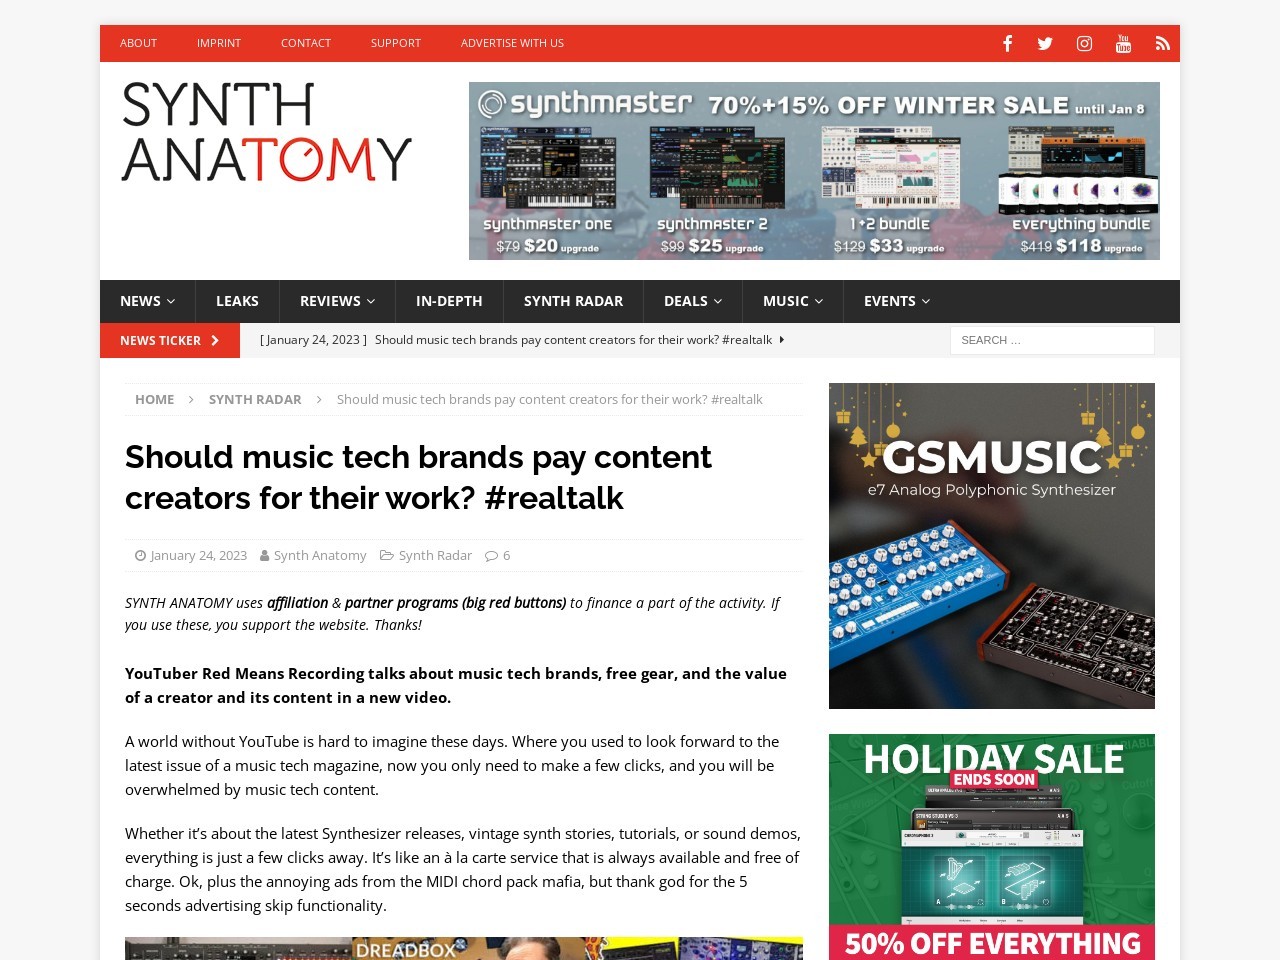 Should music tech brands pay content creators for their work?